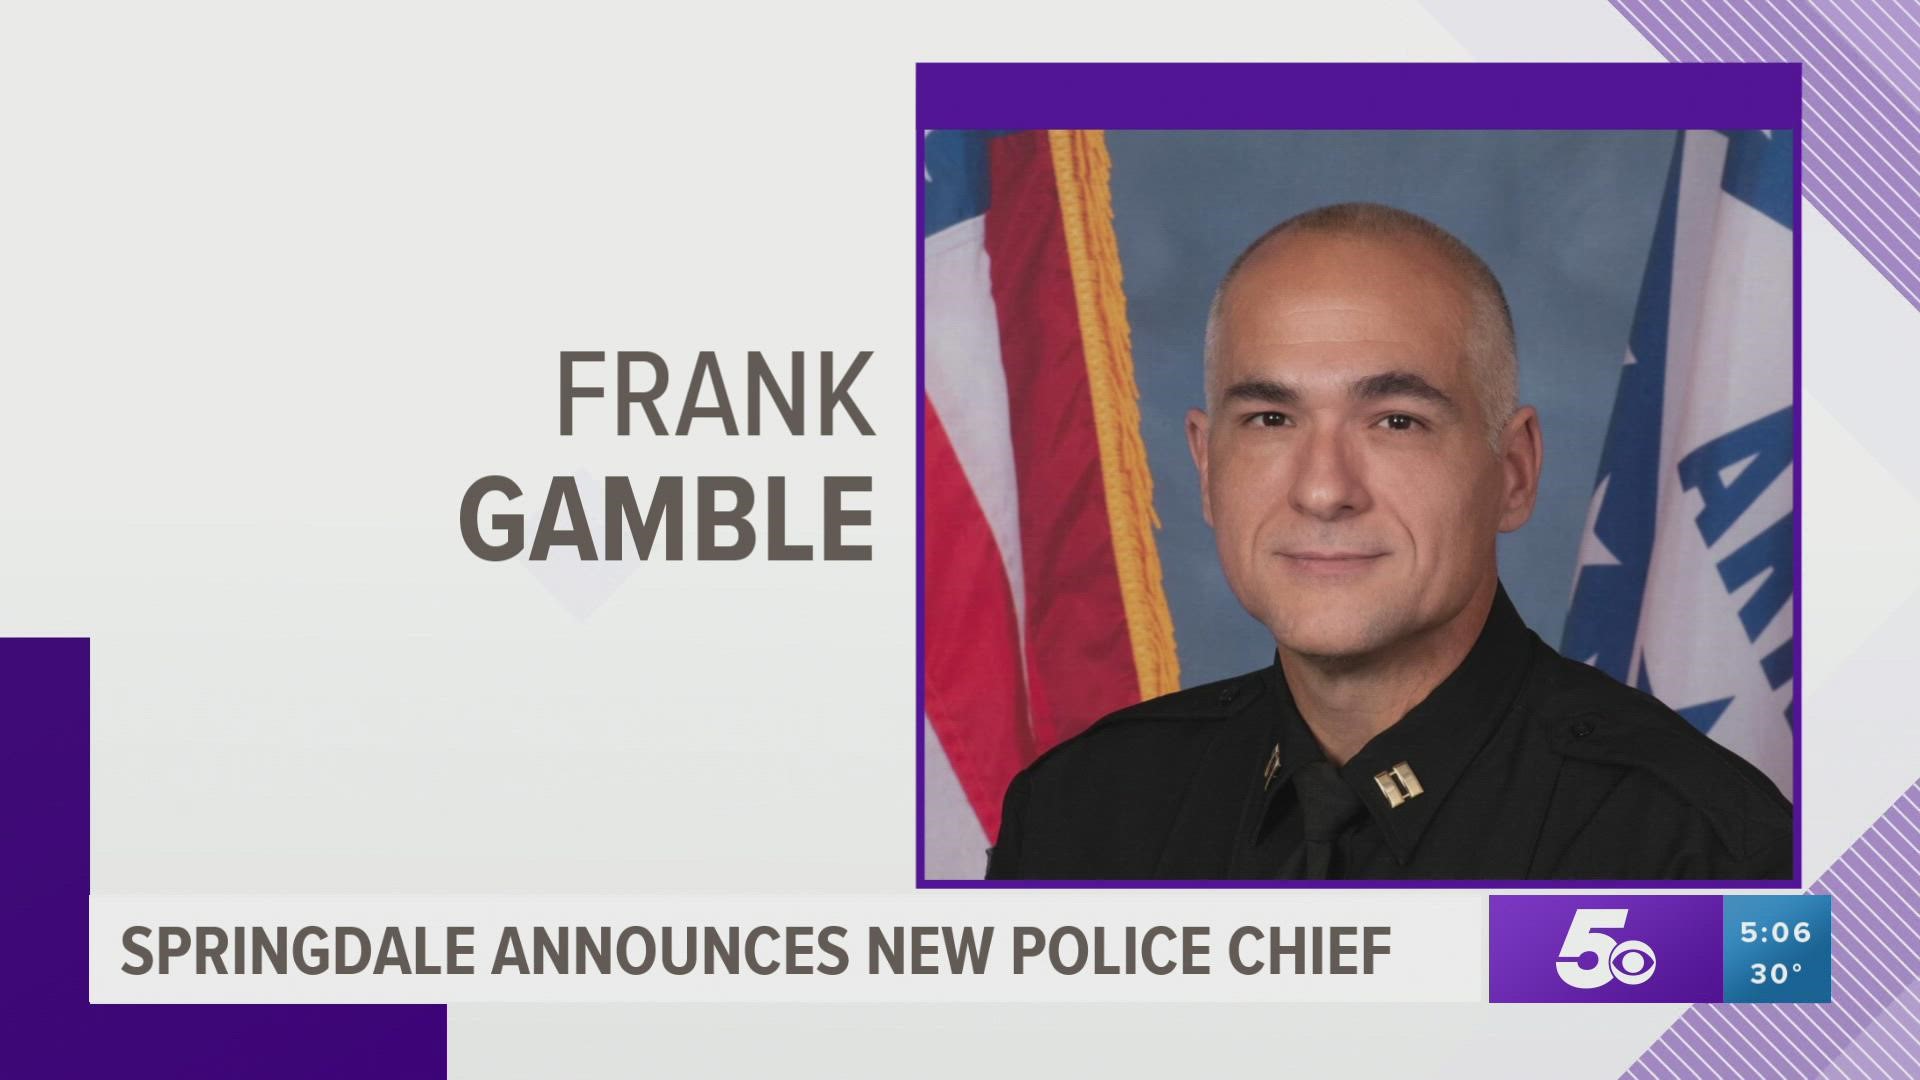 Frank Gamble was named new Springdale Police Chief on Saturday, Jan. 15, 2022.